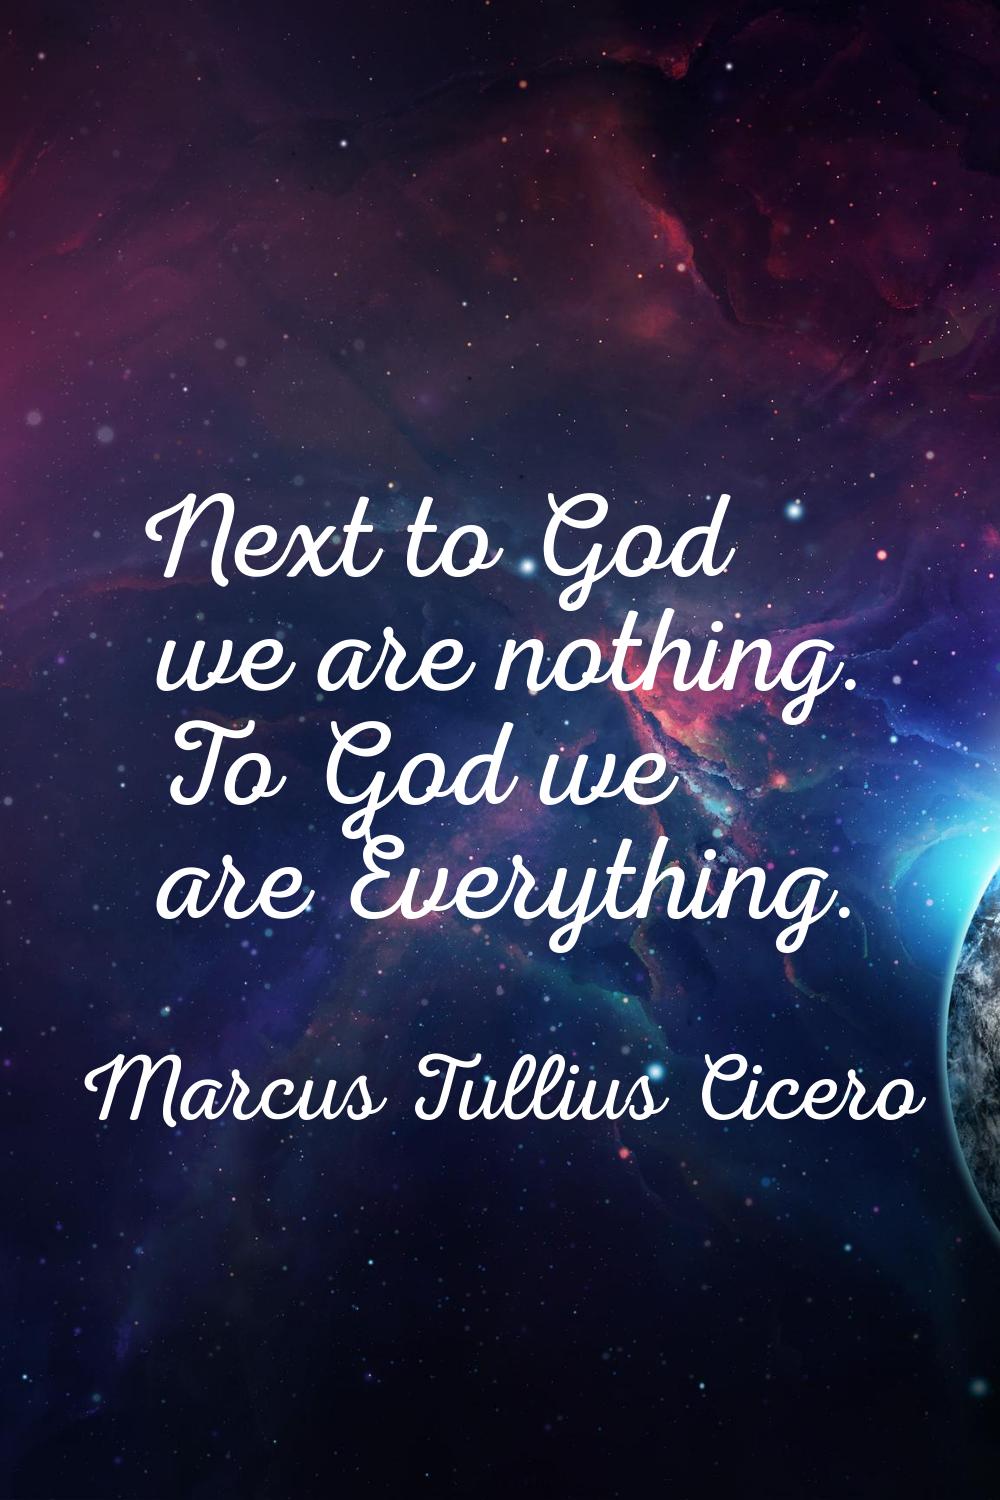 Next to God we are nothing. To God we are Everything.